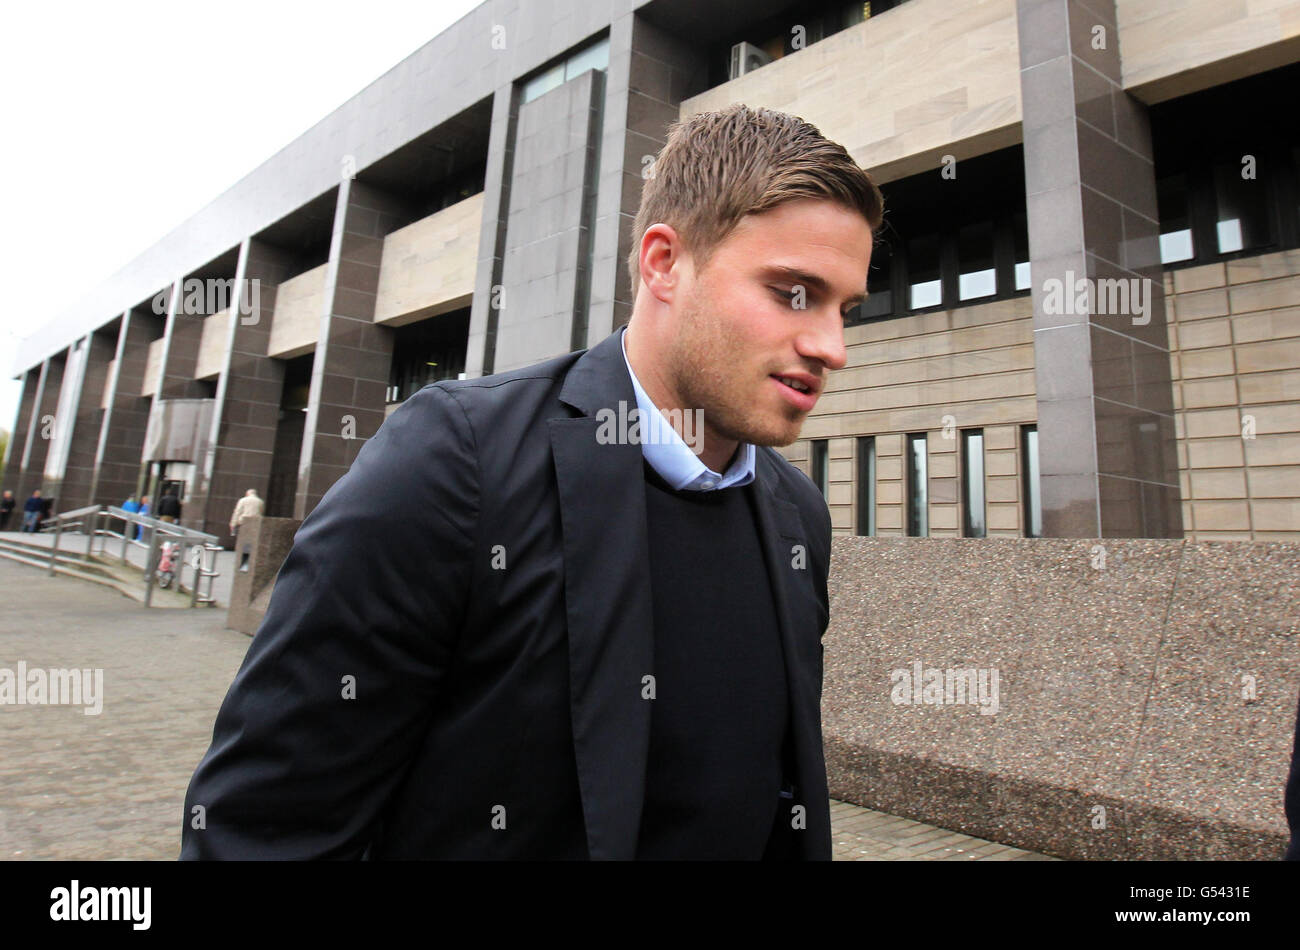 Premier League footballer David Goodwillie leaves Glasgow Sheriff Court after being given a community service order for assaulting John Friel in Glasgow's Queen Street on November 3 2010. Stock Photo